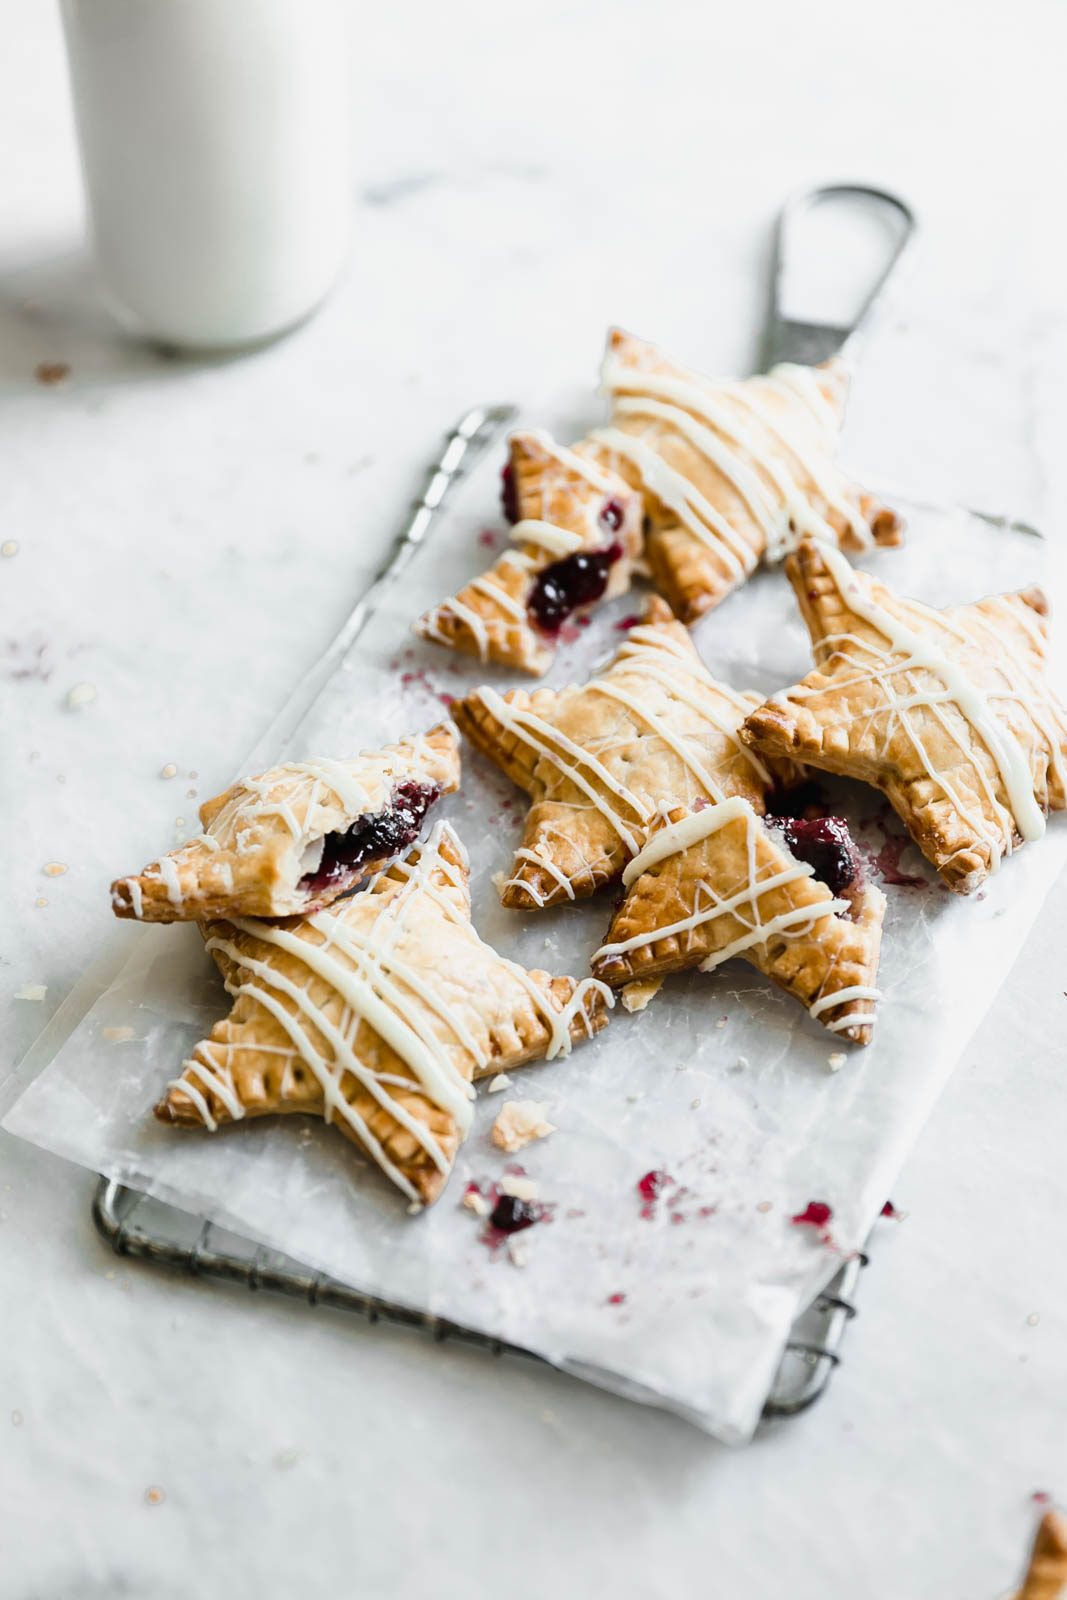 Sometimes, you just want pie. And some of those sometimes, you want pie that fits in your hand. Enter: these White Chocolate Blueberry Star Shaped Hand Pies